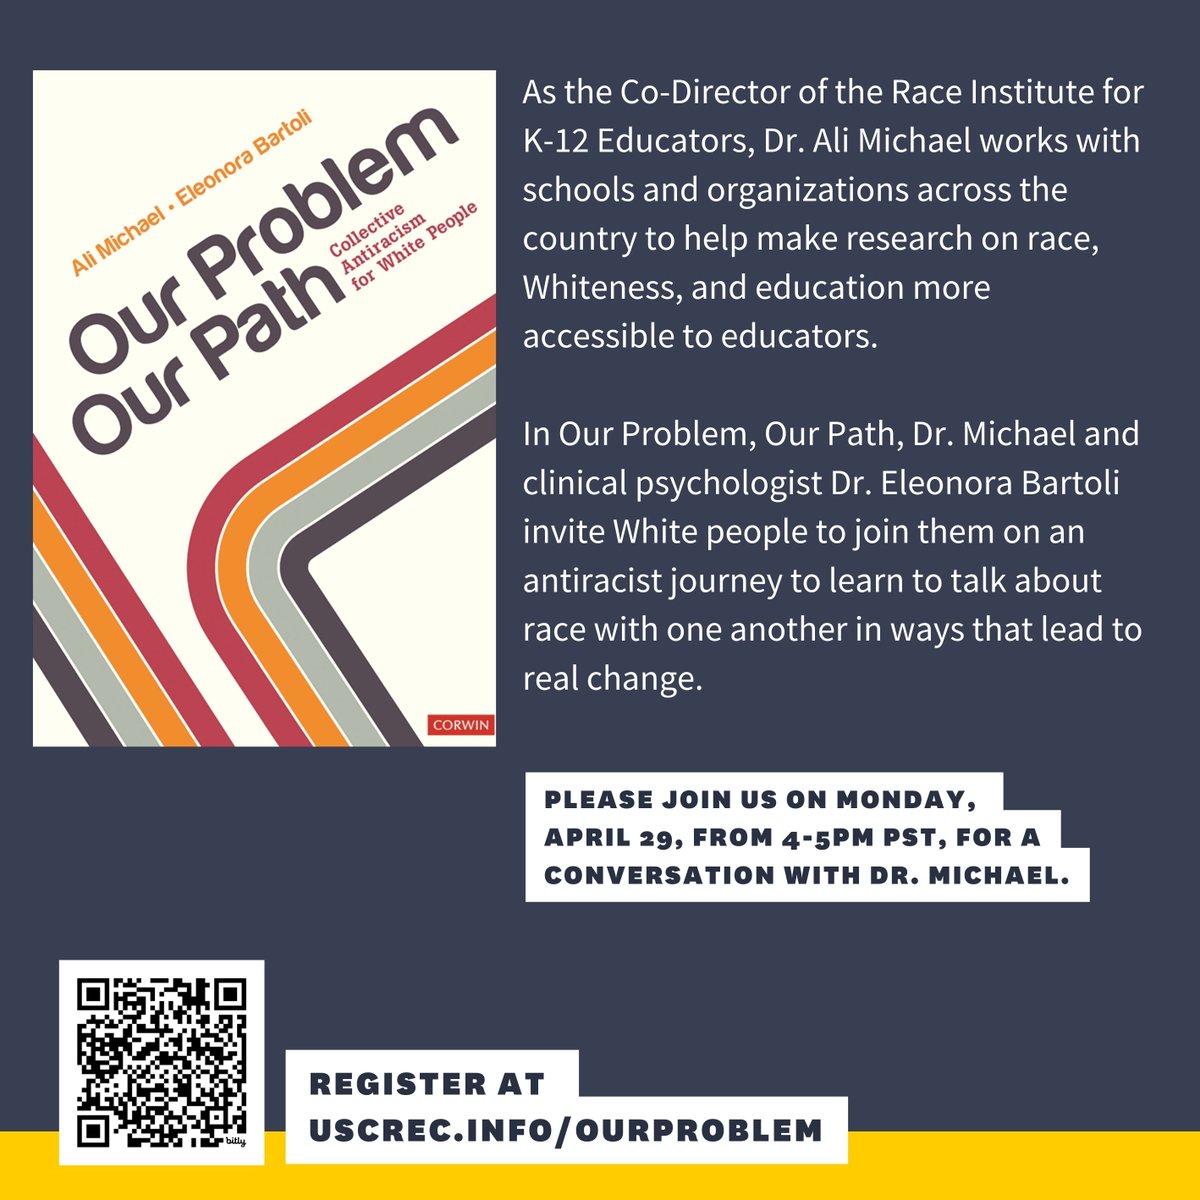 TODAY IS THE DAY! Join us today at 4 pm PST for our #BookTalk Series with Dr. Ali Michael, co-author of 'Our Problem, Our Path': Collective Antiracism for White People'. Register here: uscrec.info/ourproblem